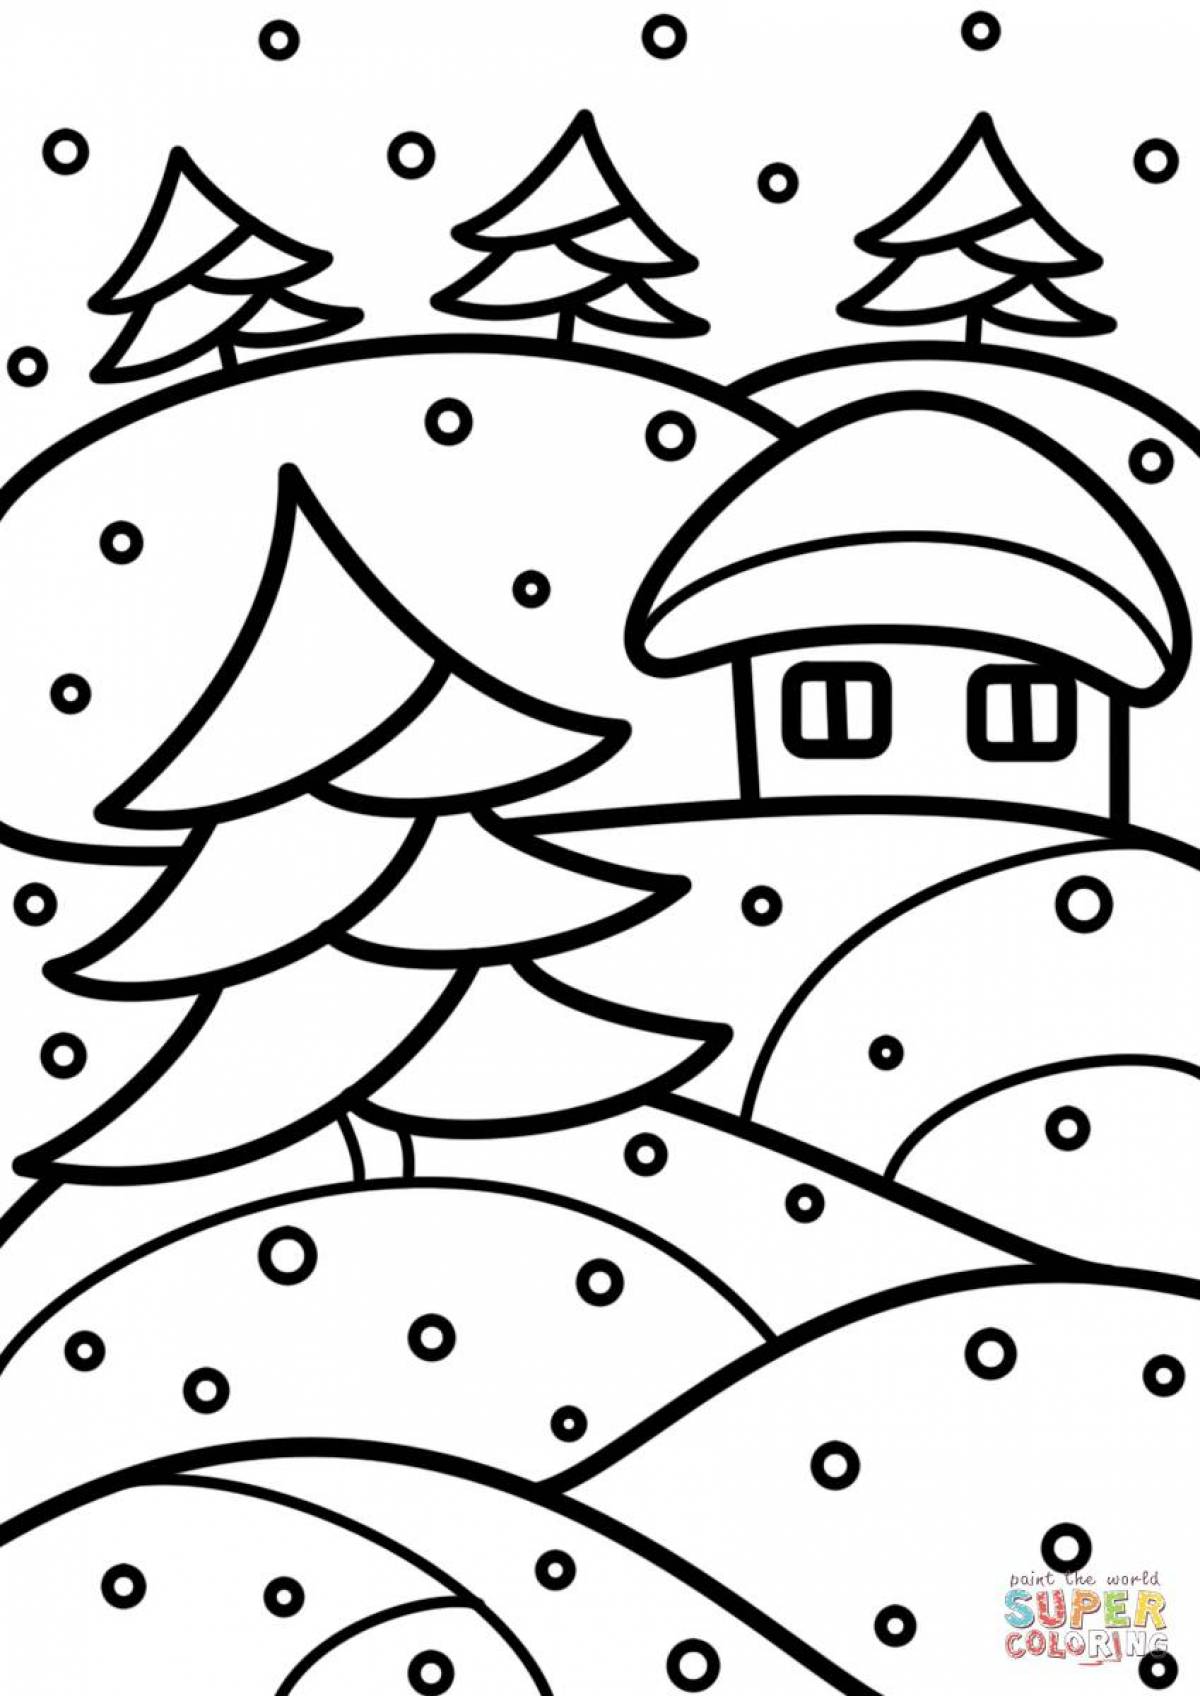 Live coloring winter for children 10 years old